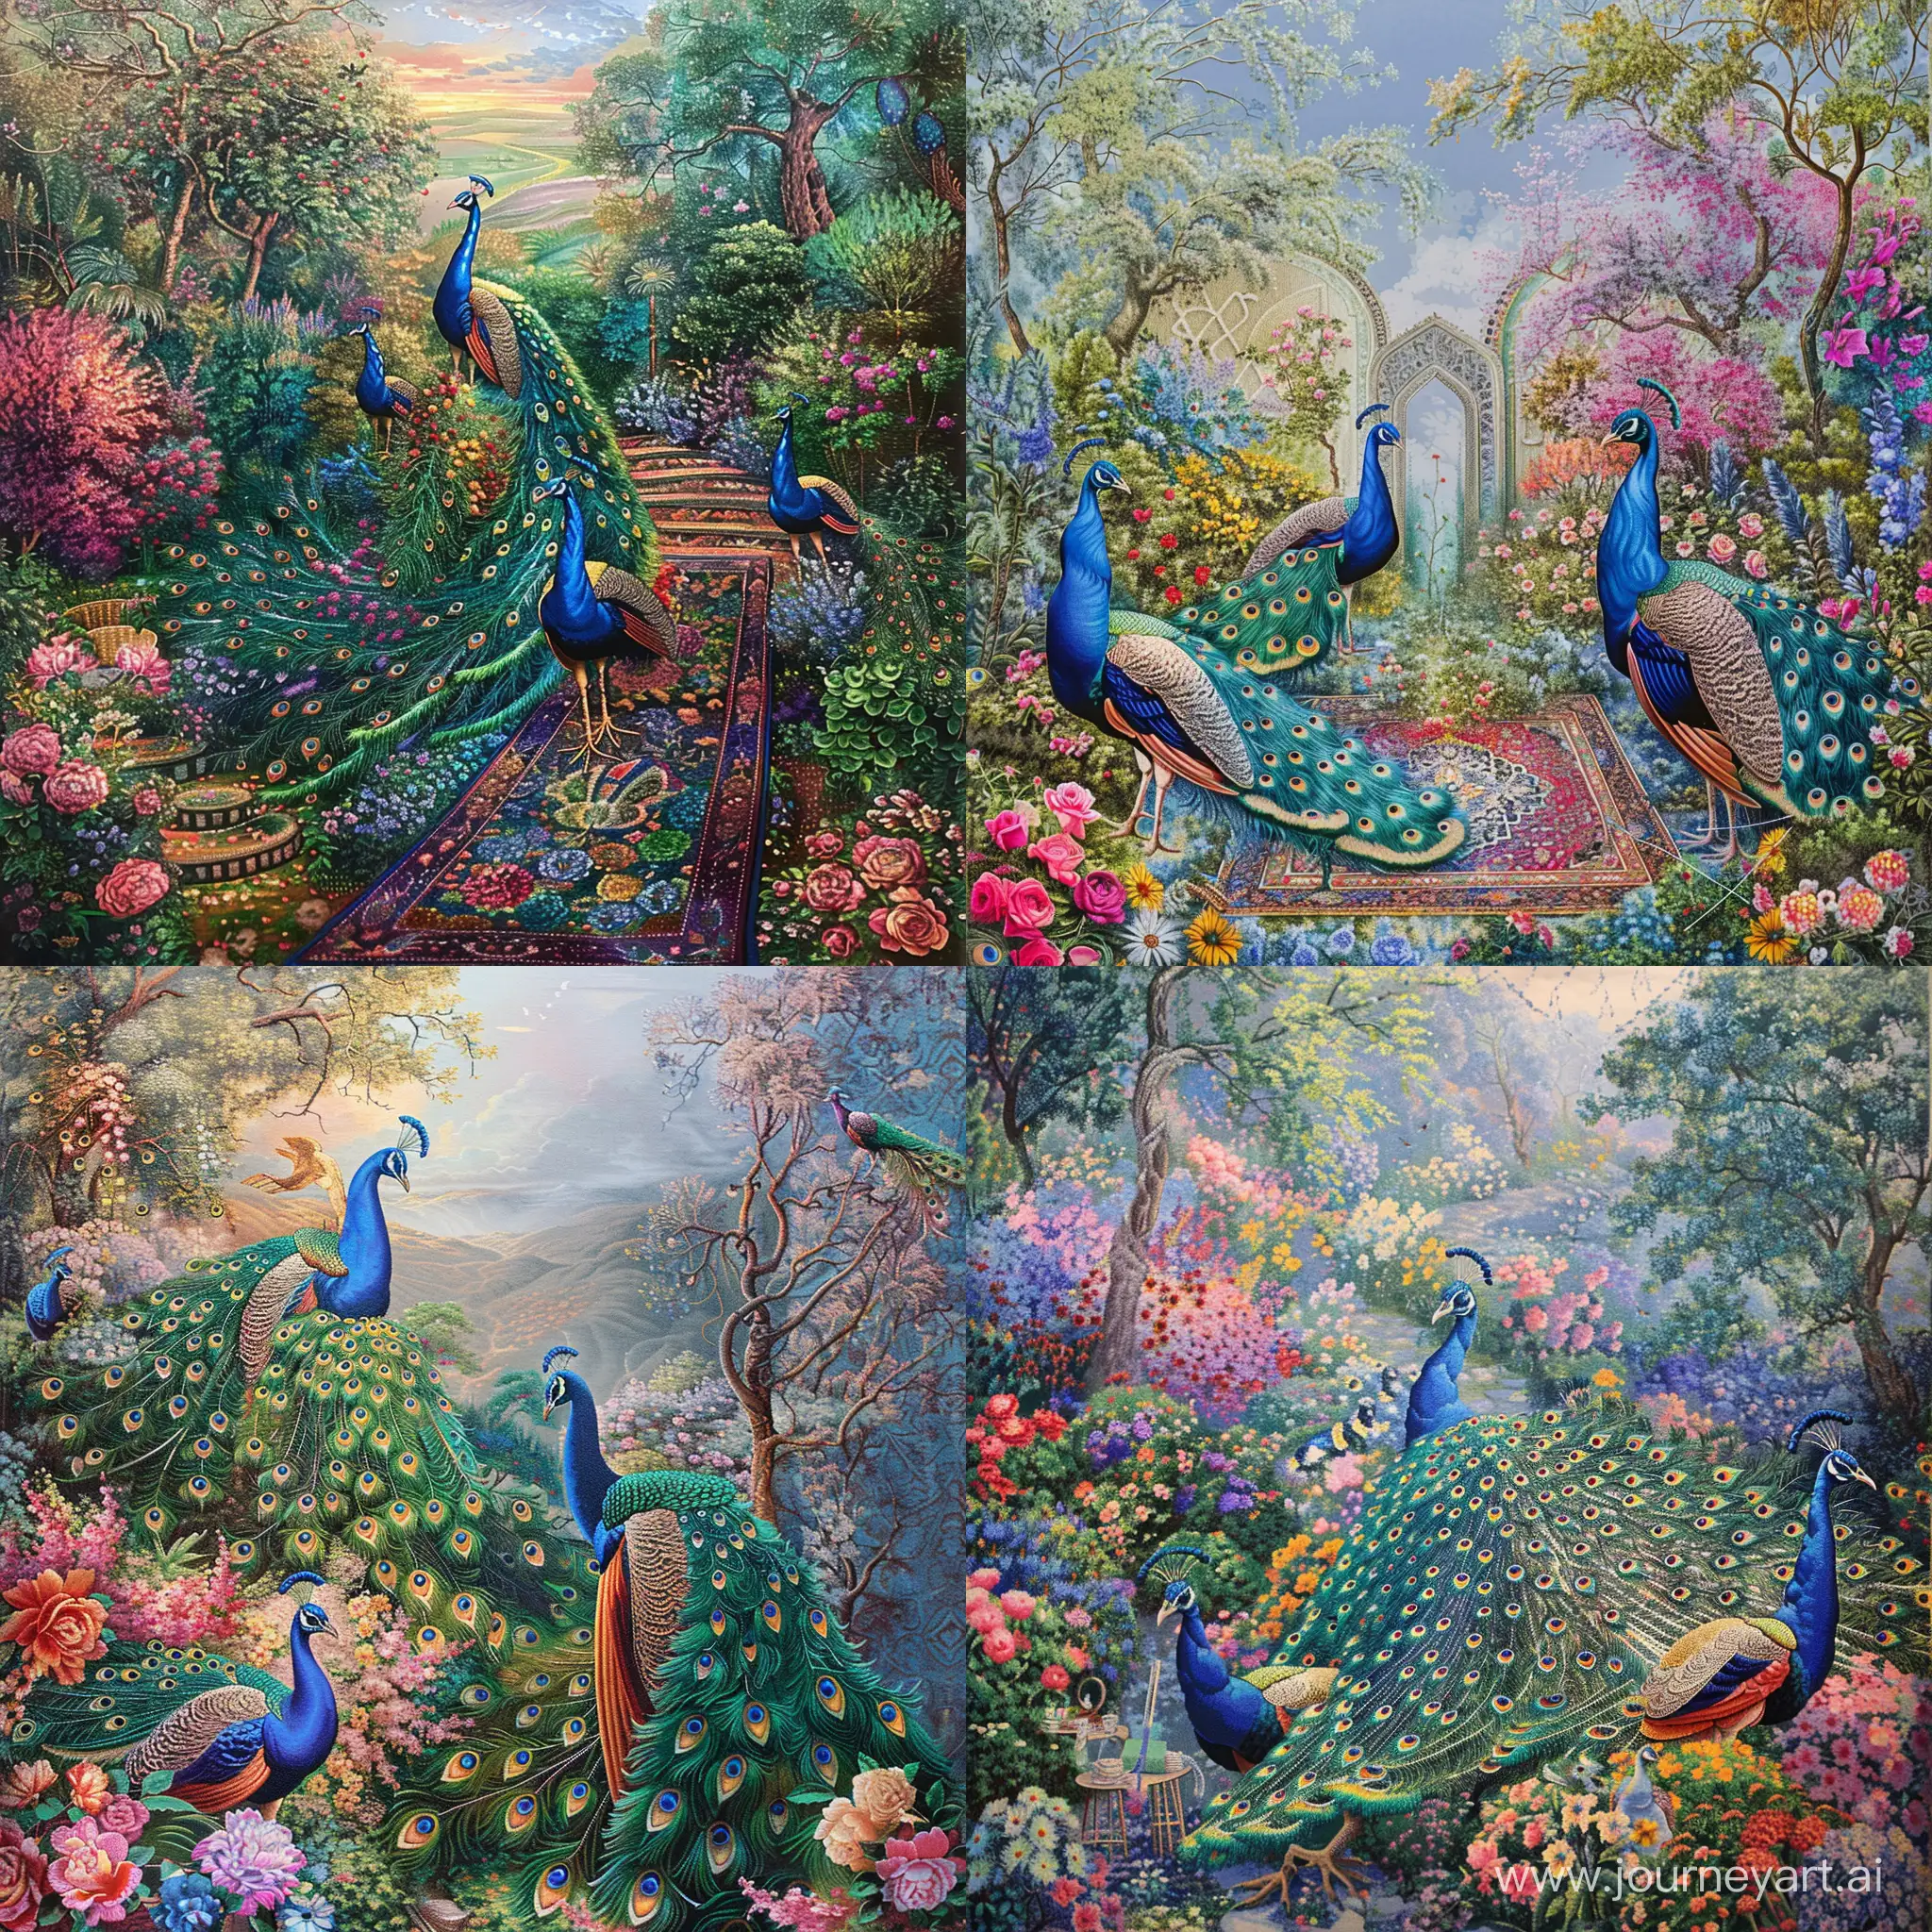 Iranian carpet is being woven from peacocks in heaven, where beautiful flowers and trees can be seen, the carpet weaving tools are also in the picture, the highest quality, the photo is vertical